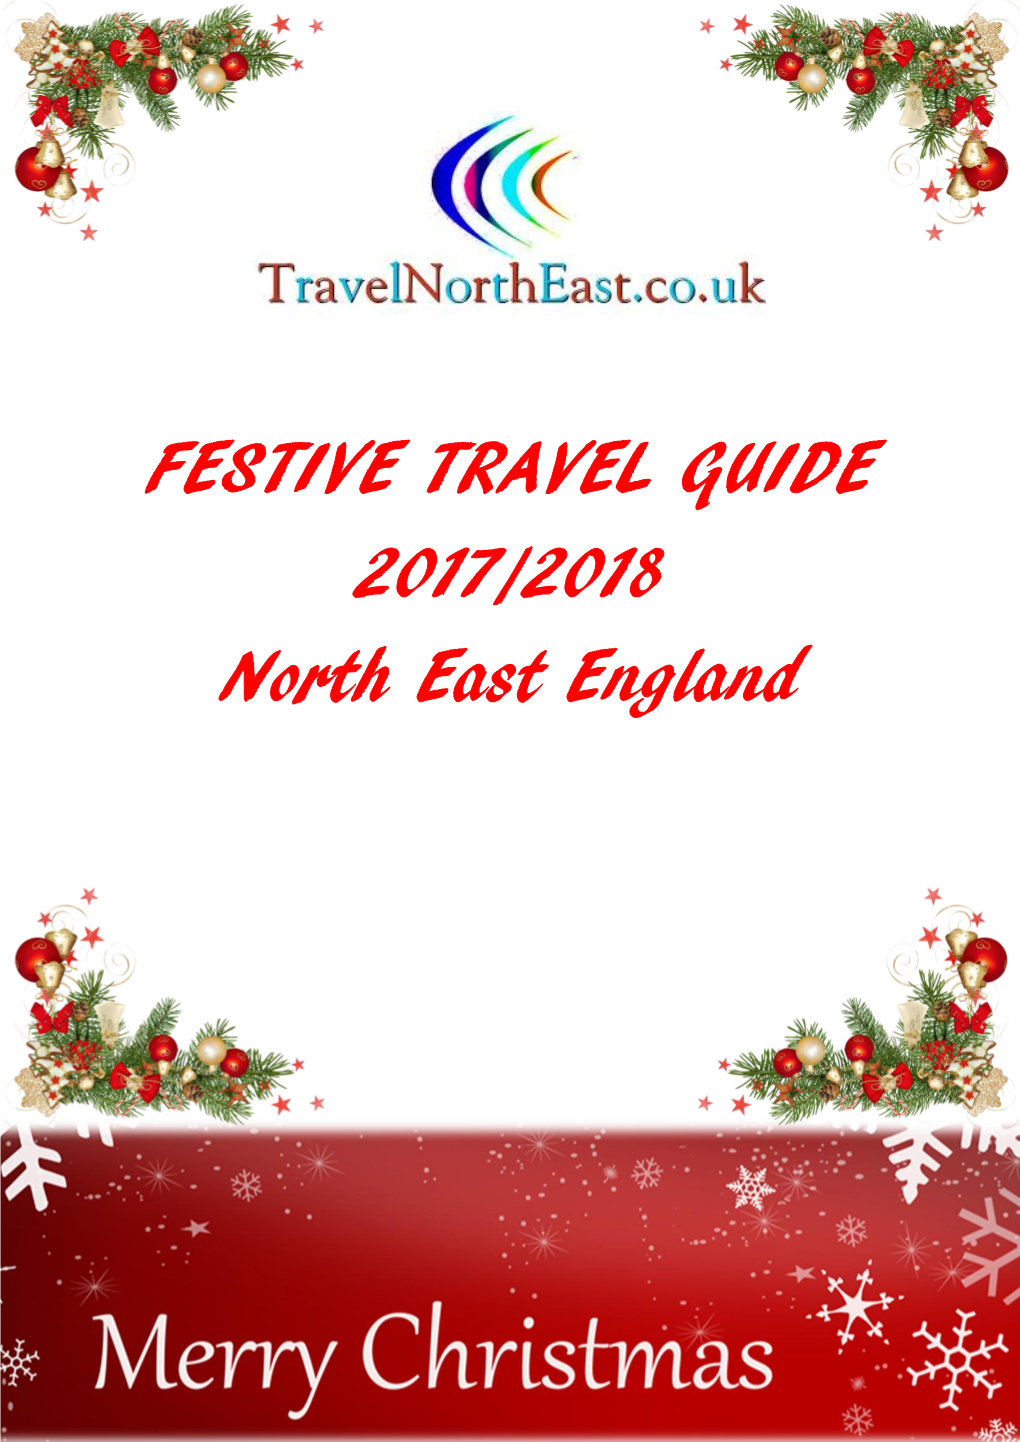 FESTIVE TRAVEL GUIDE 2017/2018 North East England